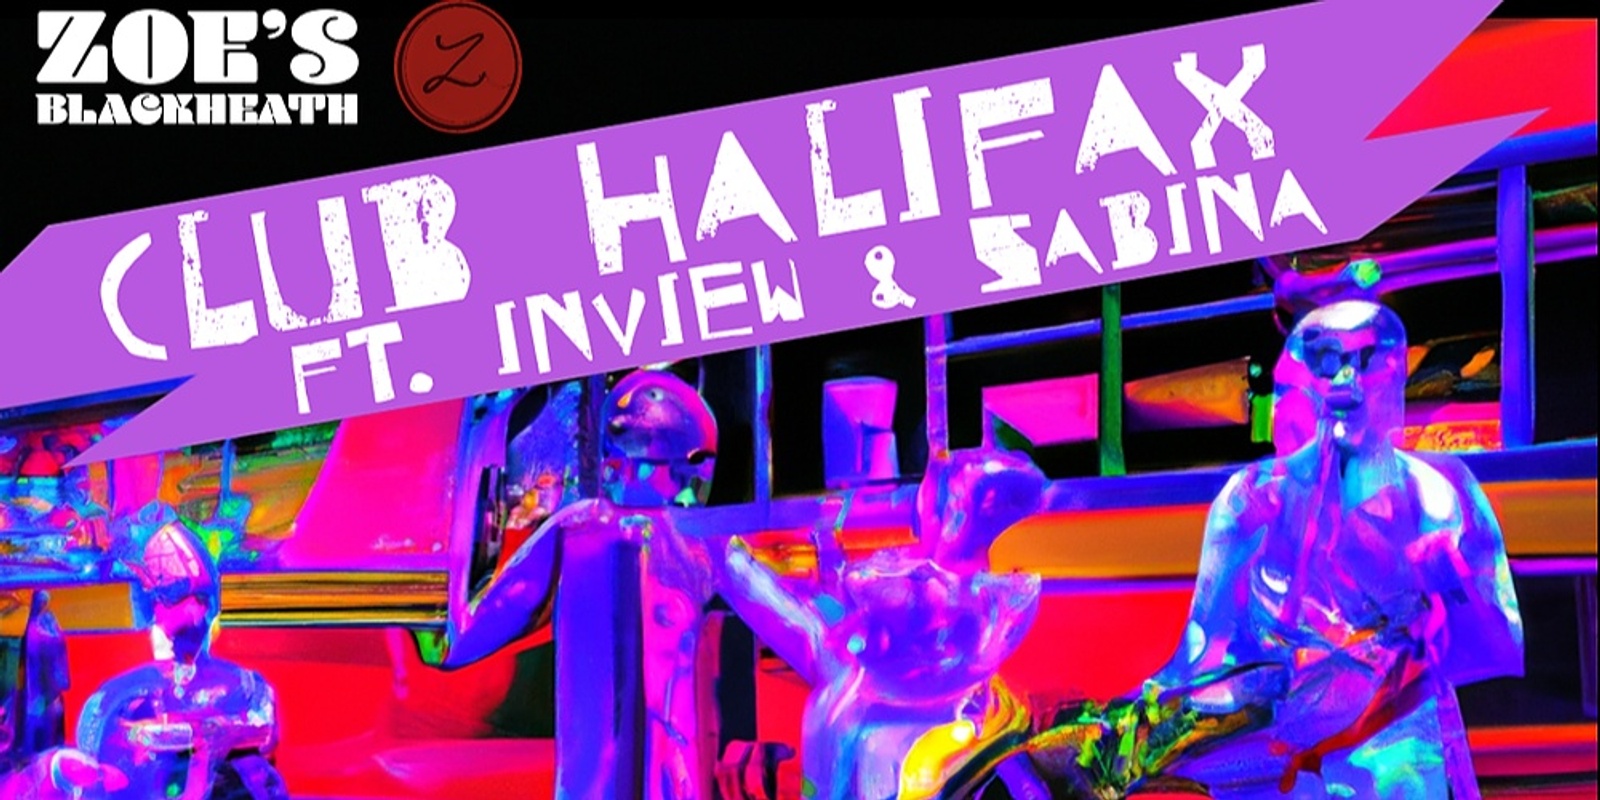 Banner image for Club Halifax Ft. Sabina & Inview